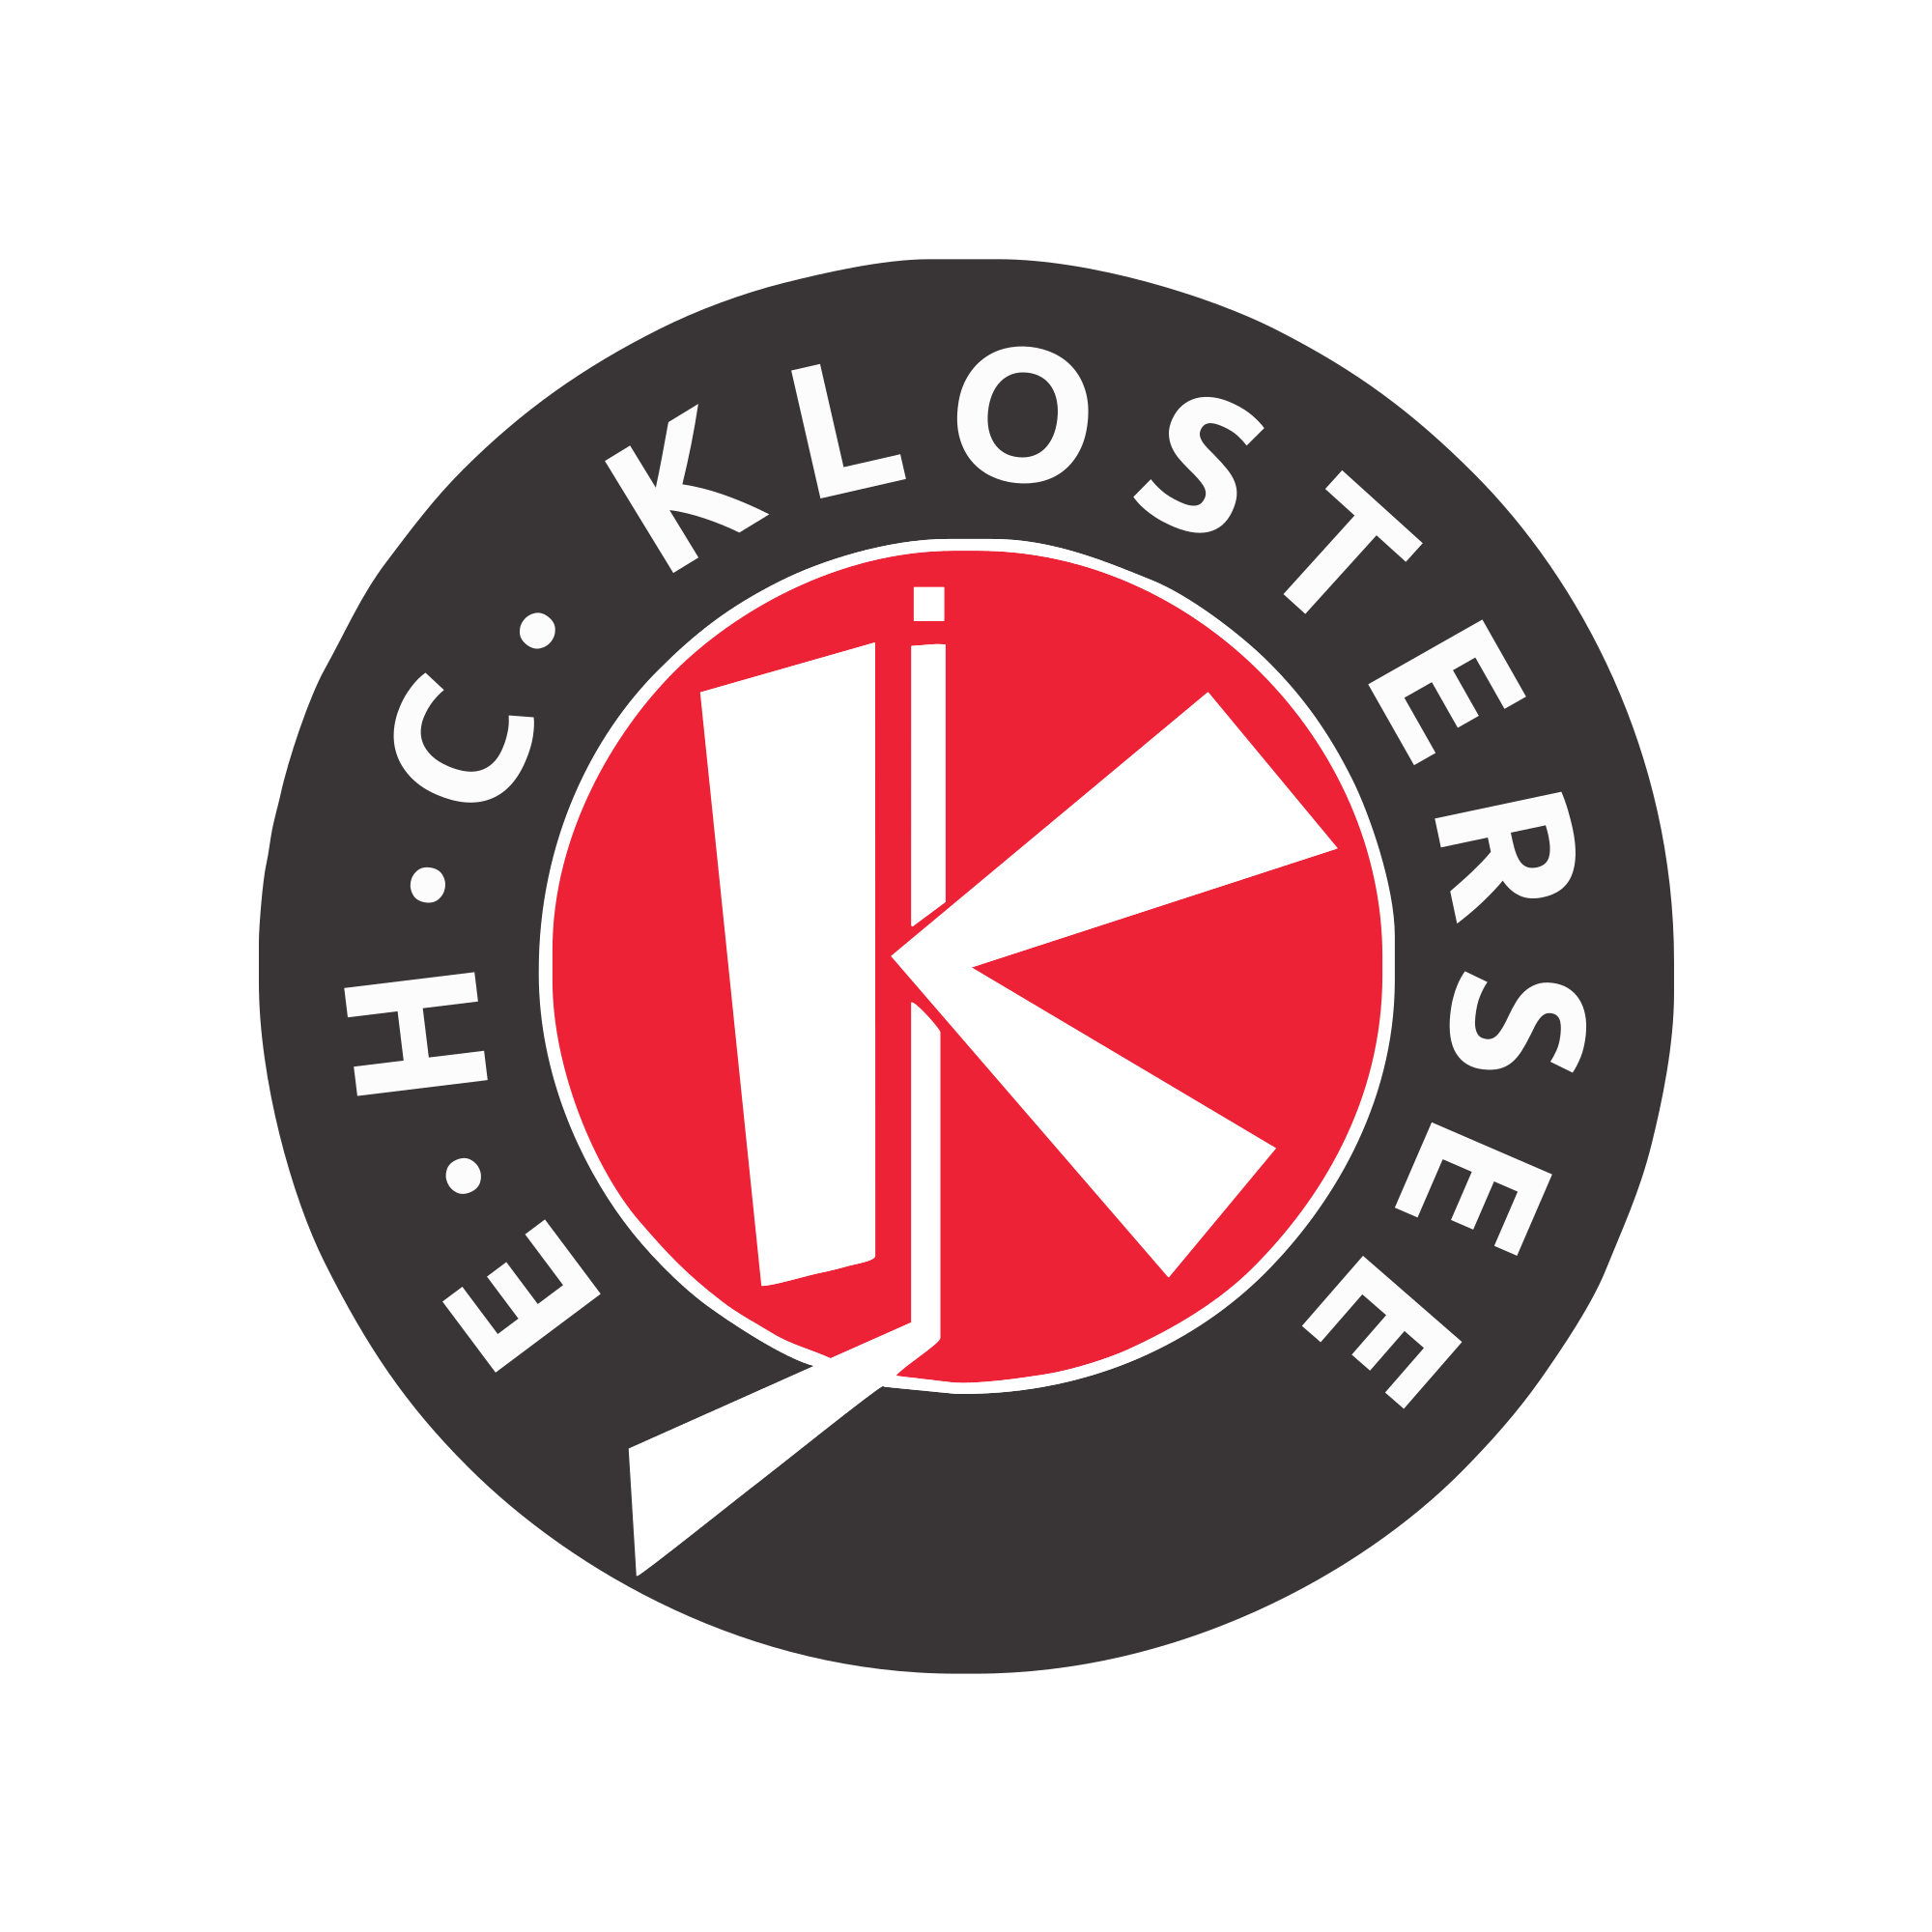 EHC Logo - File:EHC Klostersee Logo 2017.svg - Wikimedia Commons